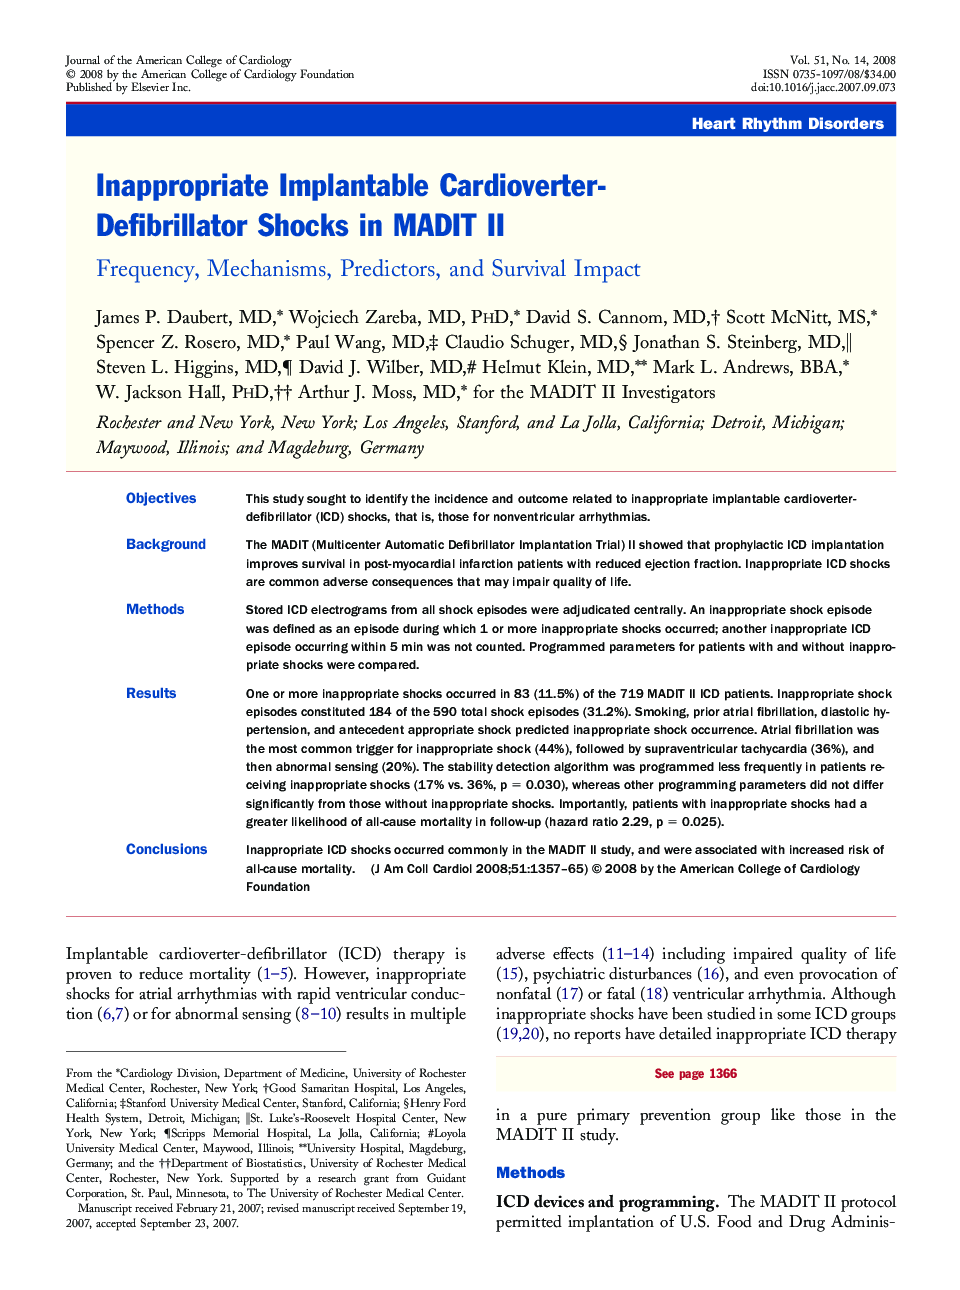 Inappropriate Implantable Cardioverter-Defibrillator Shocks in MADIT II : Frequency, Mechanisms, Predictors, and Survival Impact